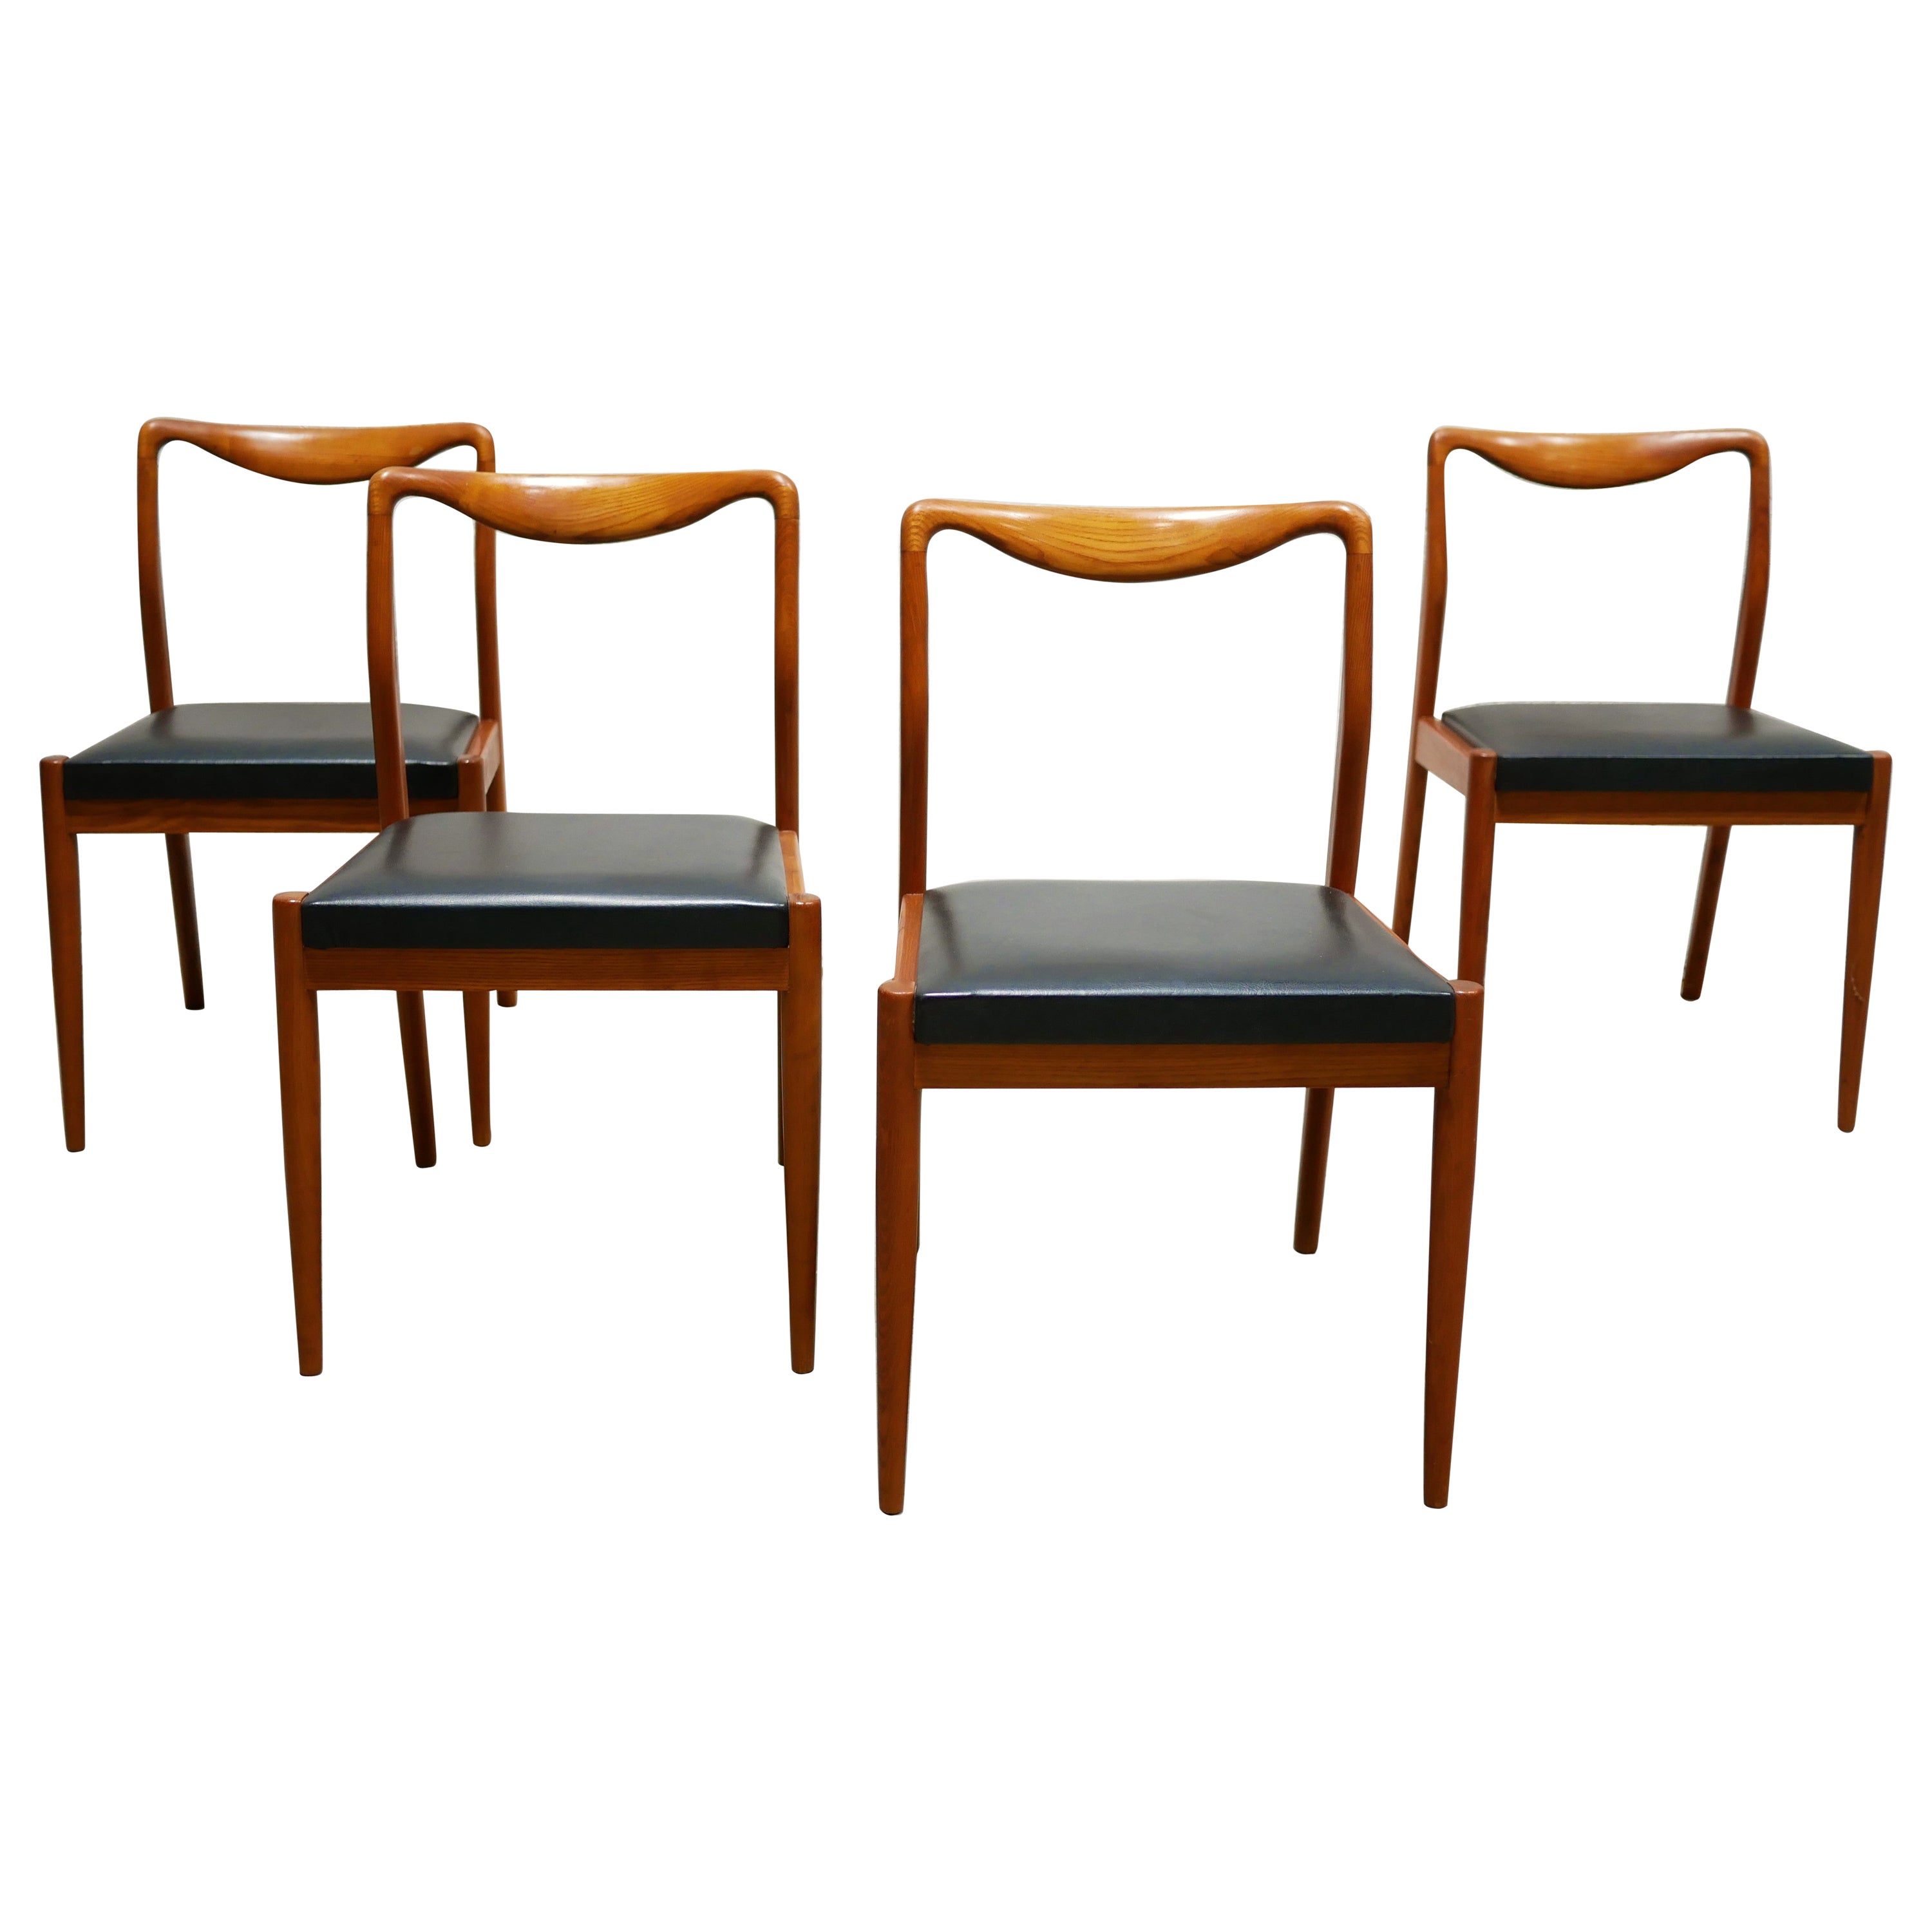 Series of 4 Vintage Scandinavian Chairs in Teak and Leatherette